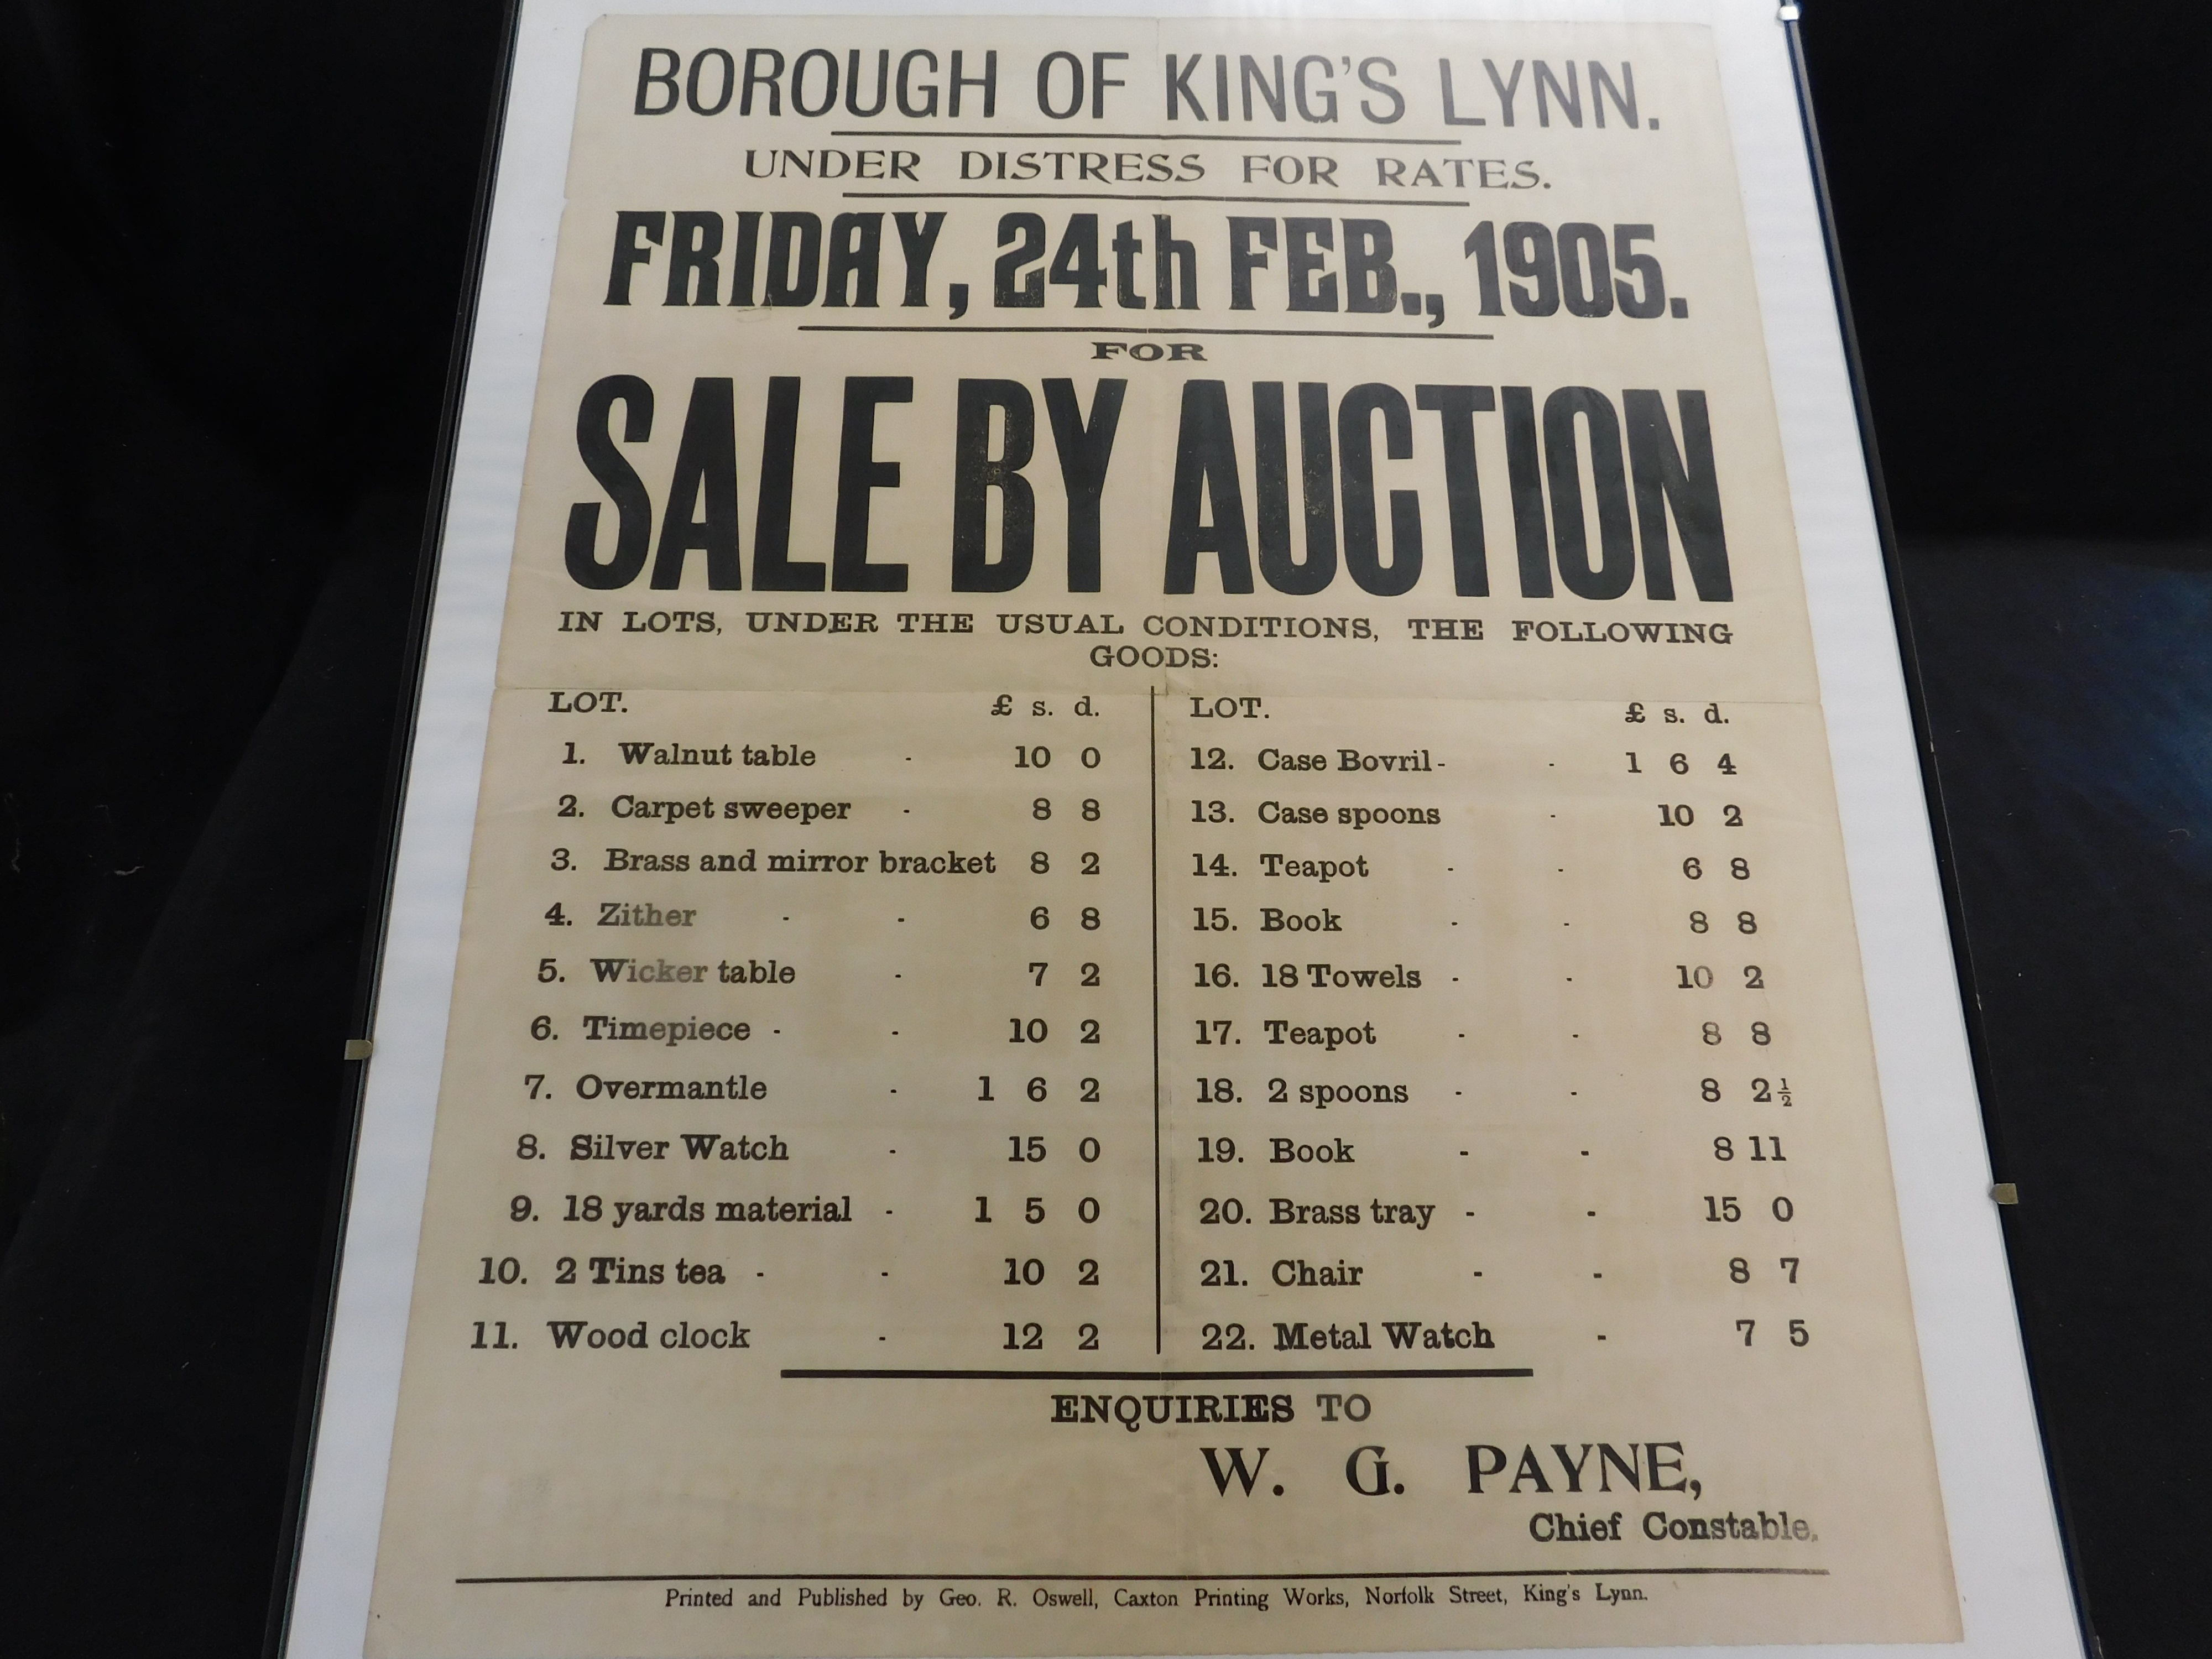 BOROUGH OF KINGS LYNN UNDER DISTRESS FOR RATES FRIDAY 24TH FEB 1905 FOR SALE BY AUCTION IN LOTS